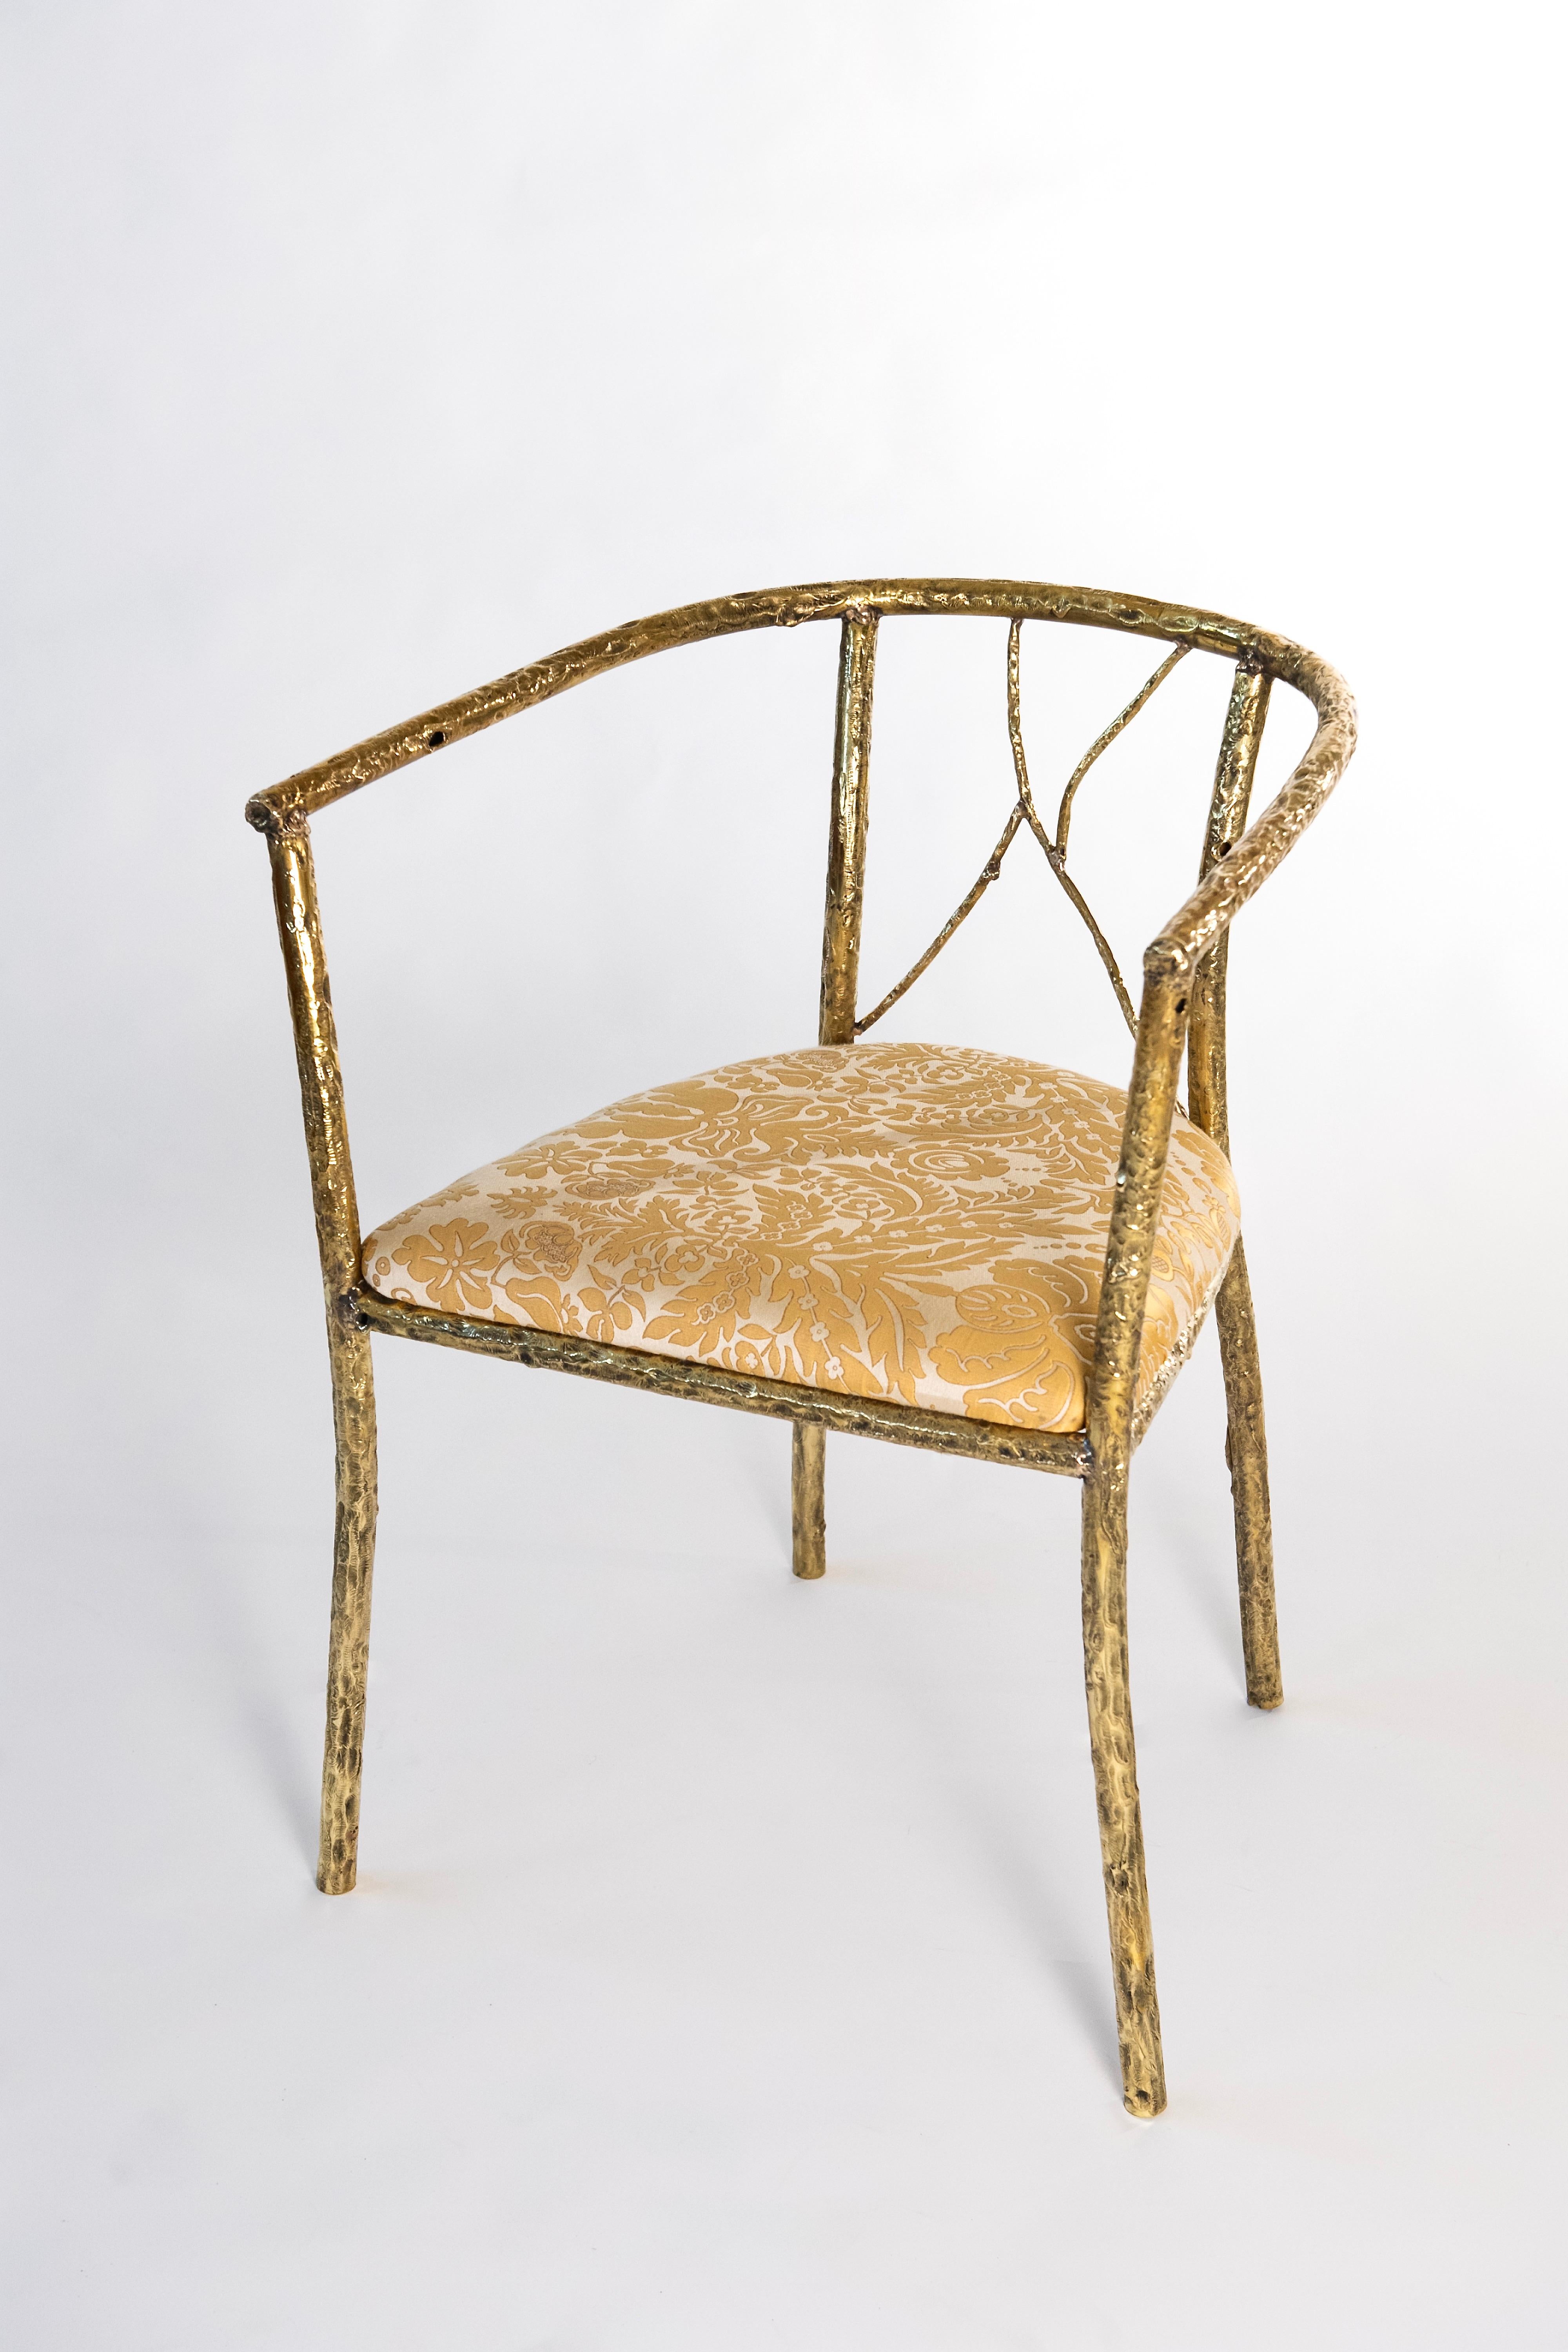 Branches chair by Samuel Costantini.
Entirely handmade by the artist.
Edition 12 + 1 AP.
Measures: W 50 x D 50 x H 75 cm.
Materials: curved brass, welded and worked on flame then polished.

Like curved vine branches, the structure of the chair